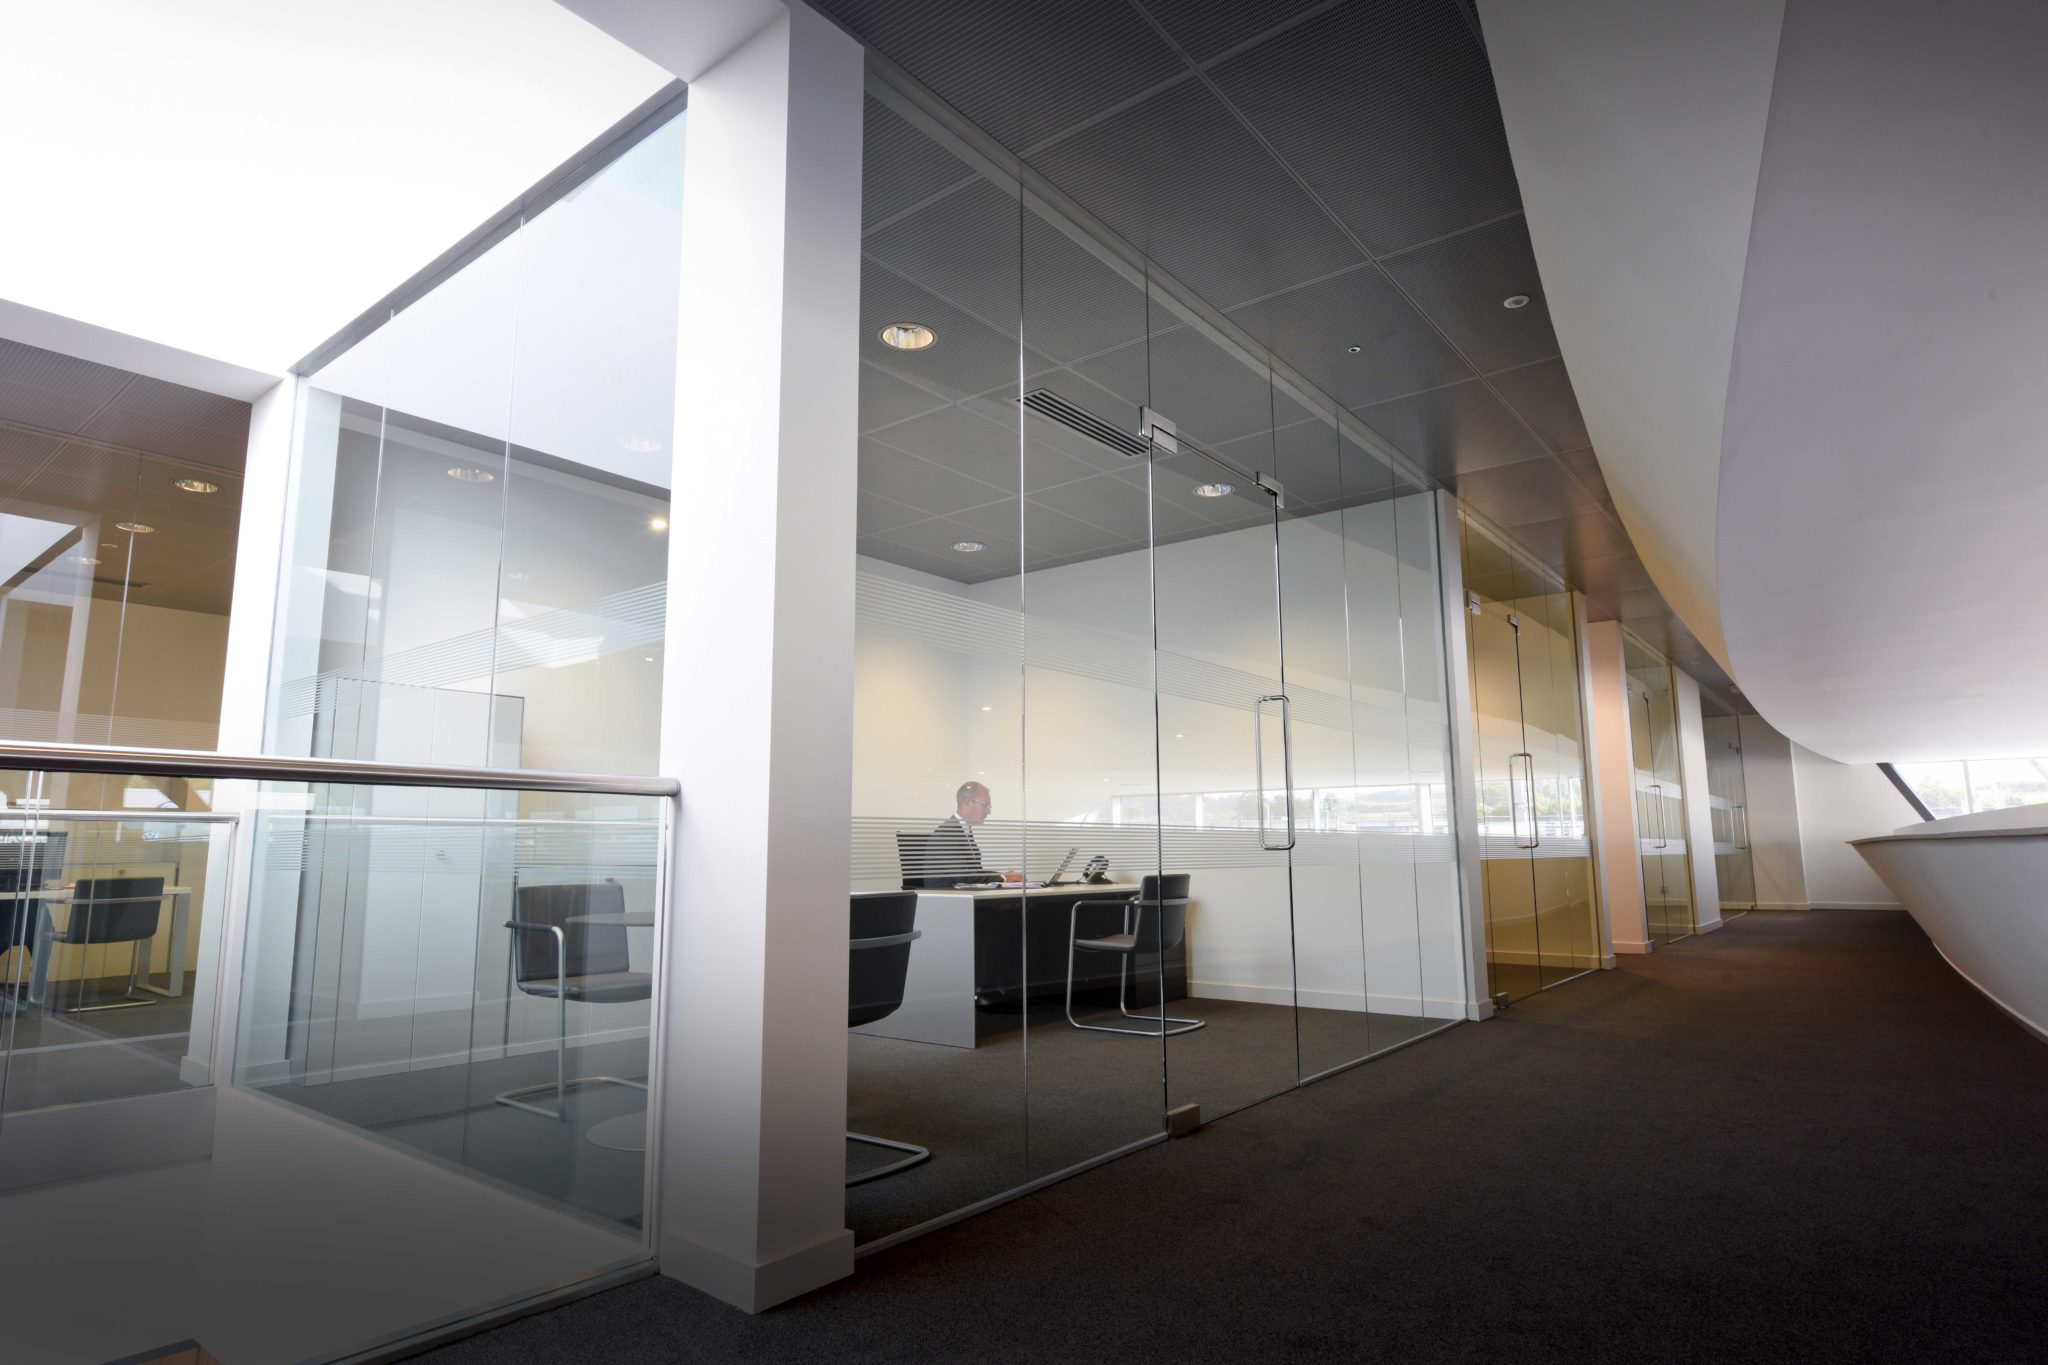 New Longline Vision partitioning system from Nevill Long